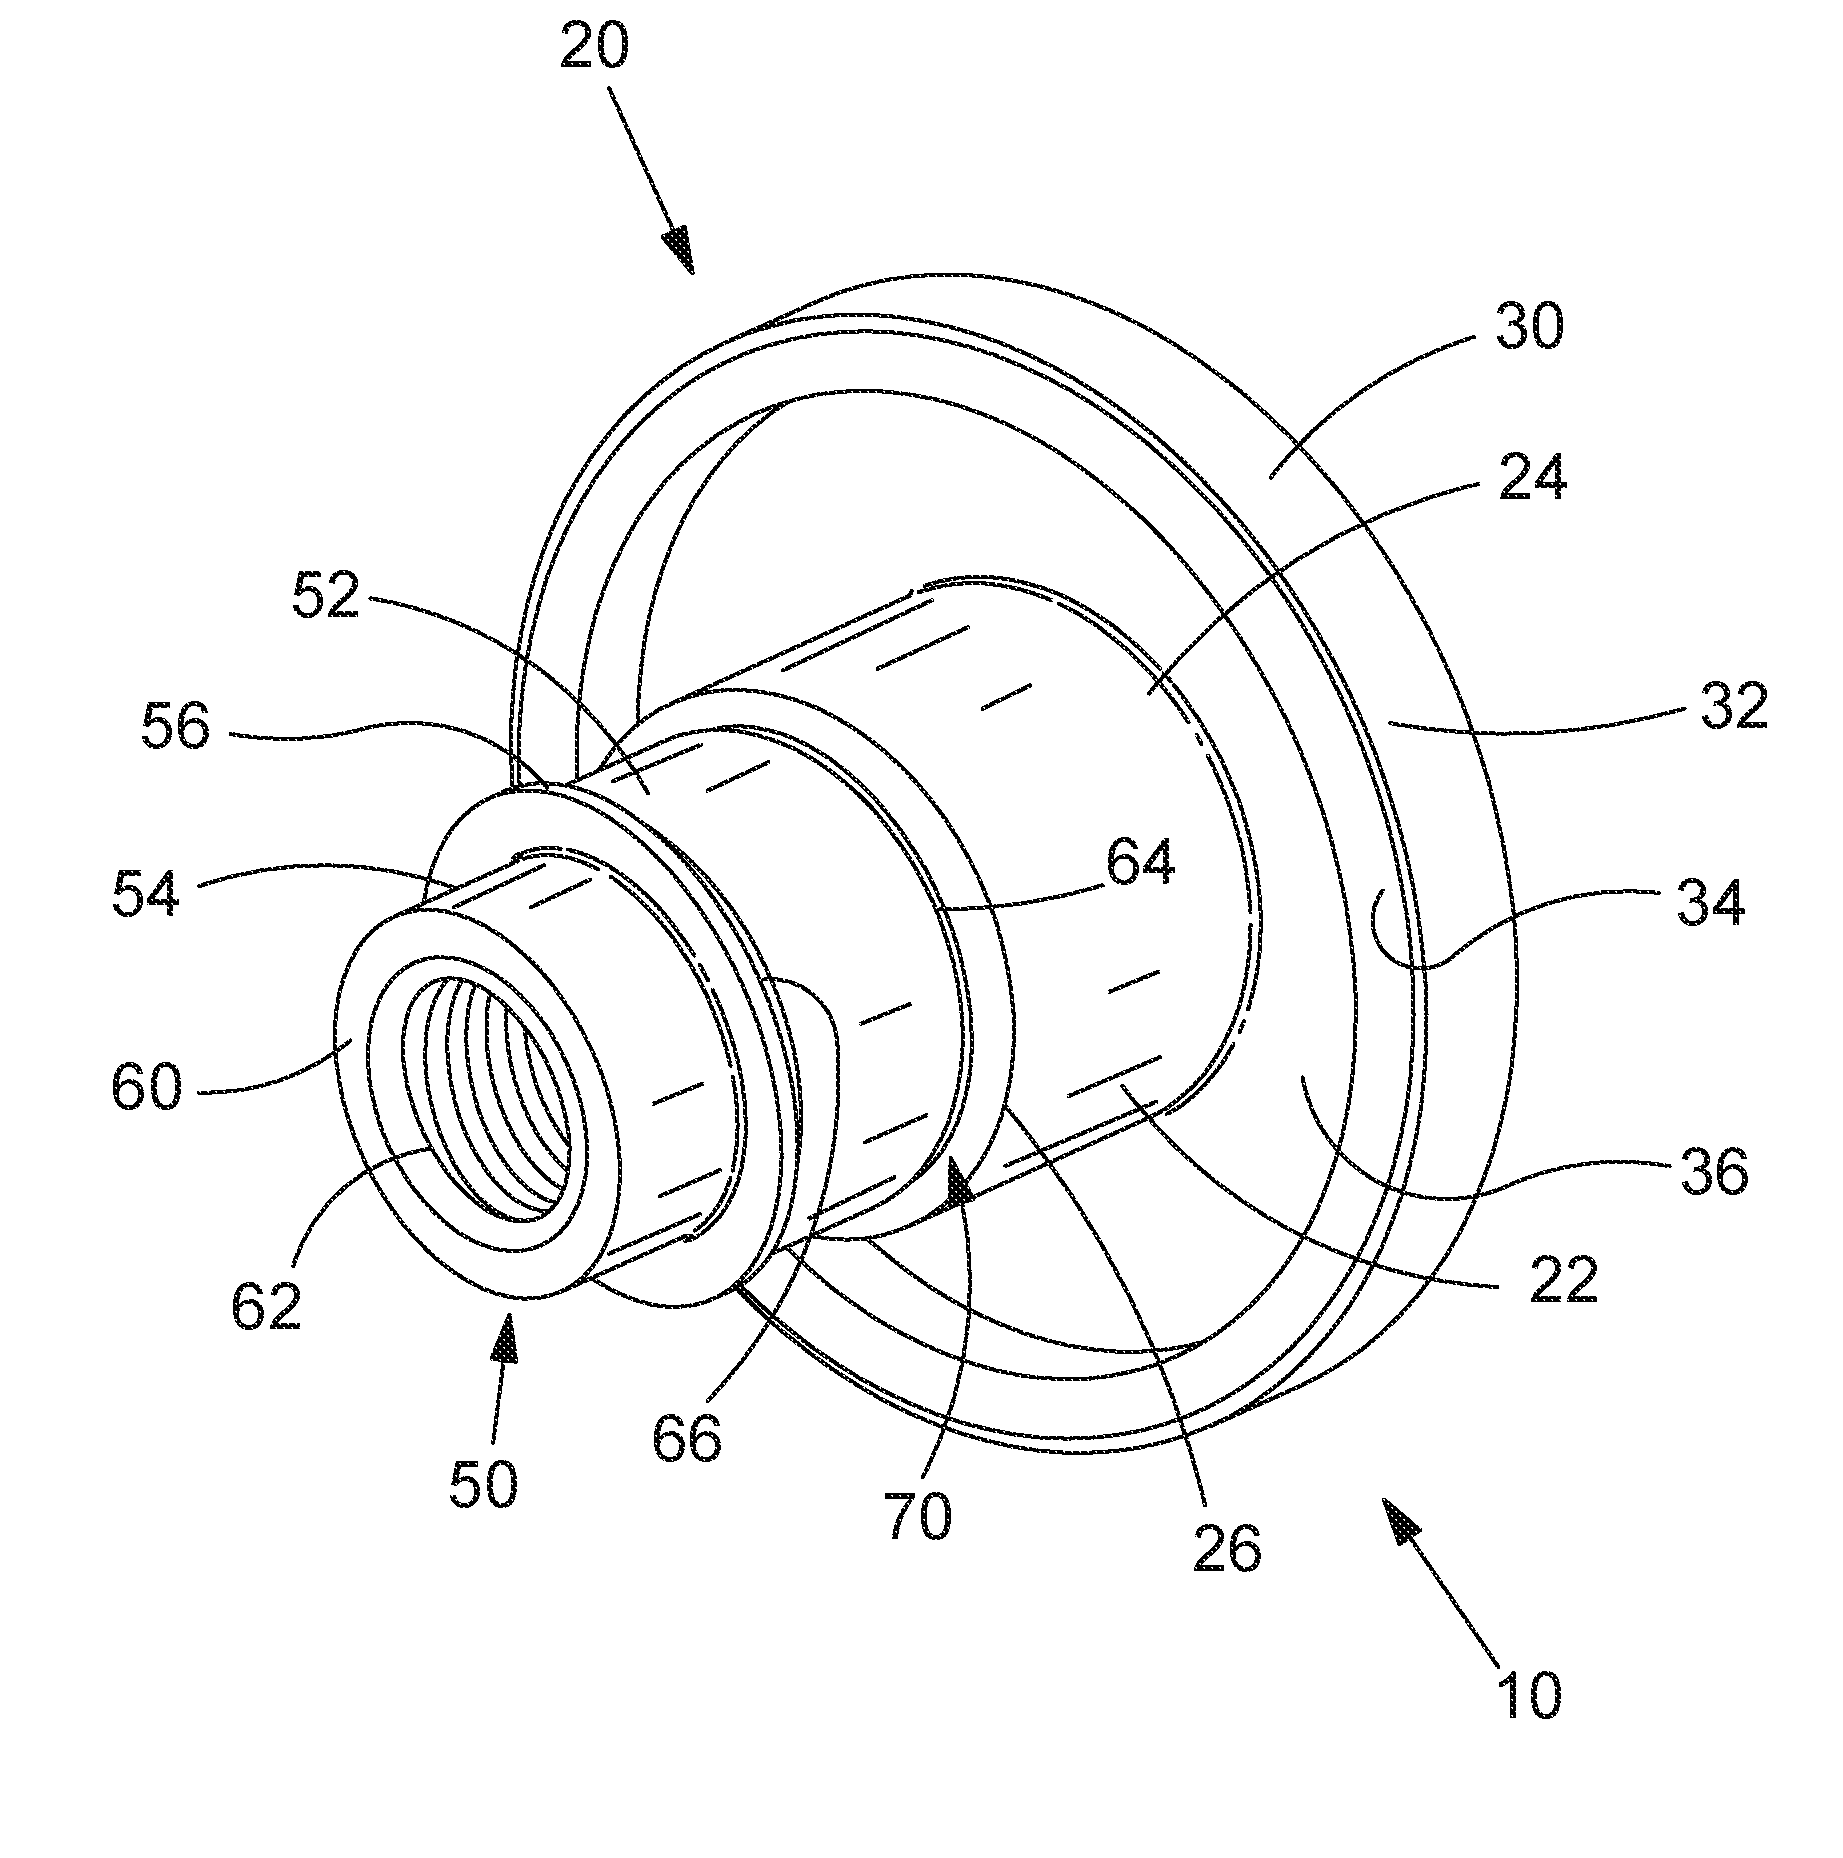 Device for Fixing an Electrical Connection Terminal to a Support